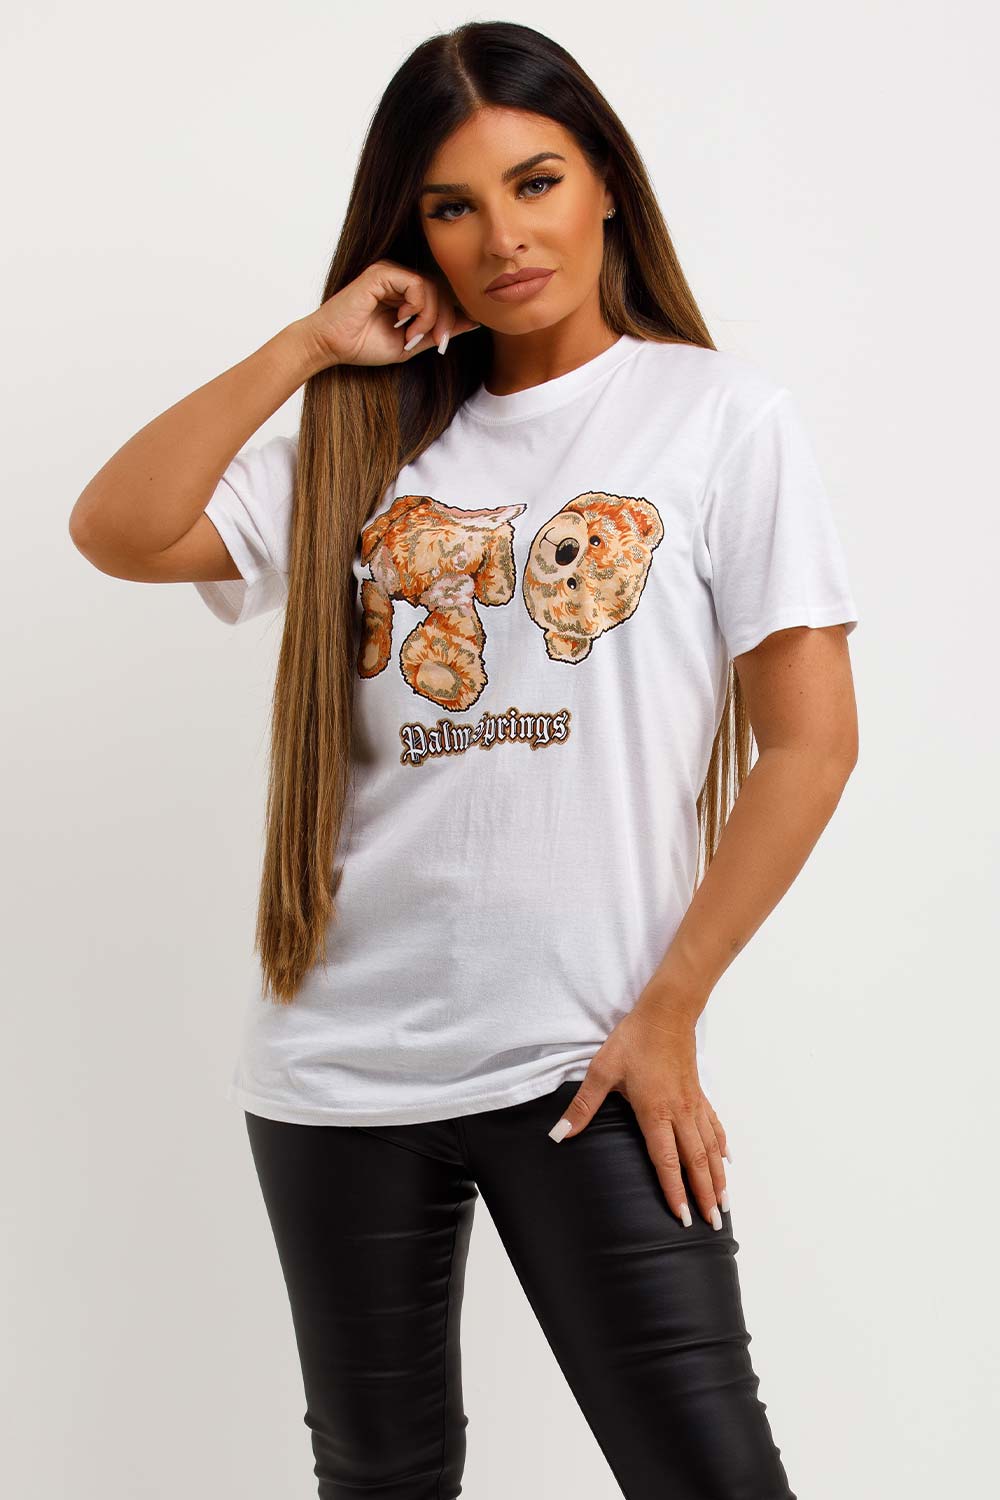 white t shirt with palm springs slogan and teddy bear graphics